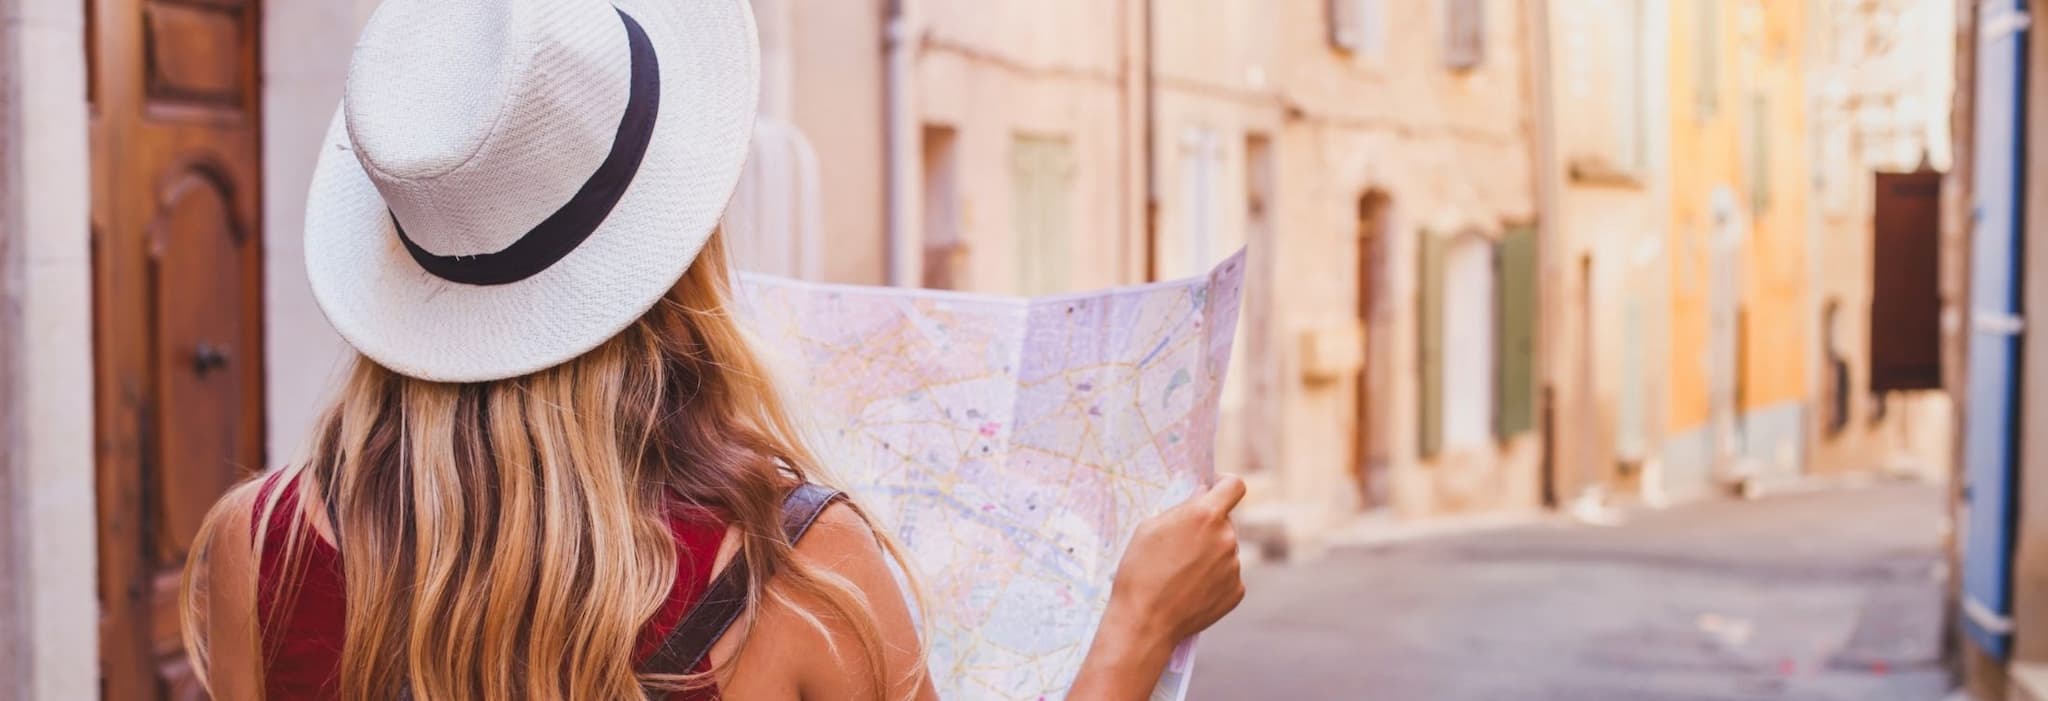 7 Tips For Solo Female Travellers